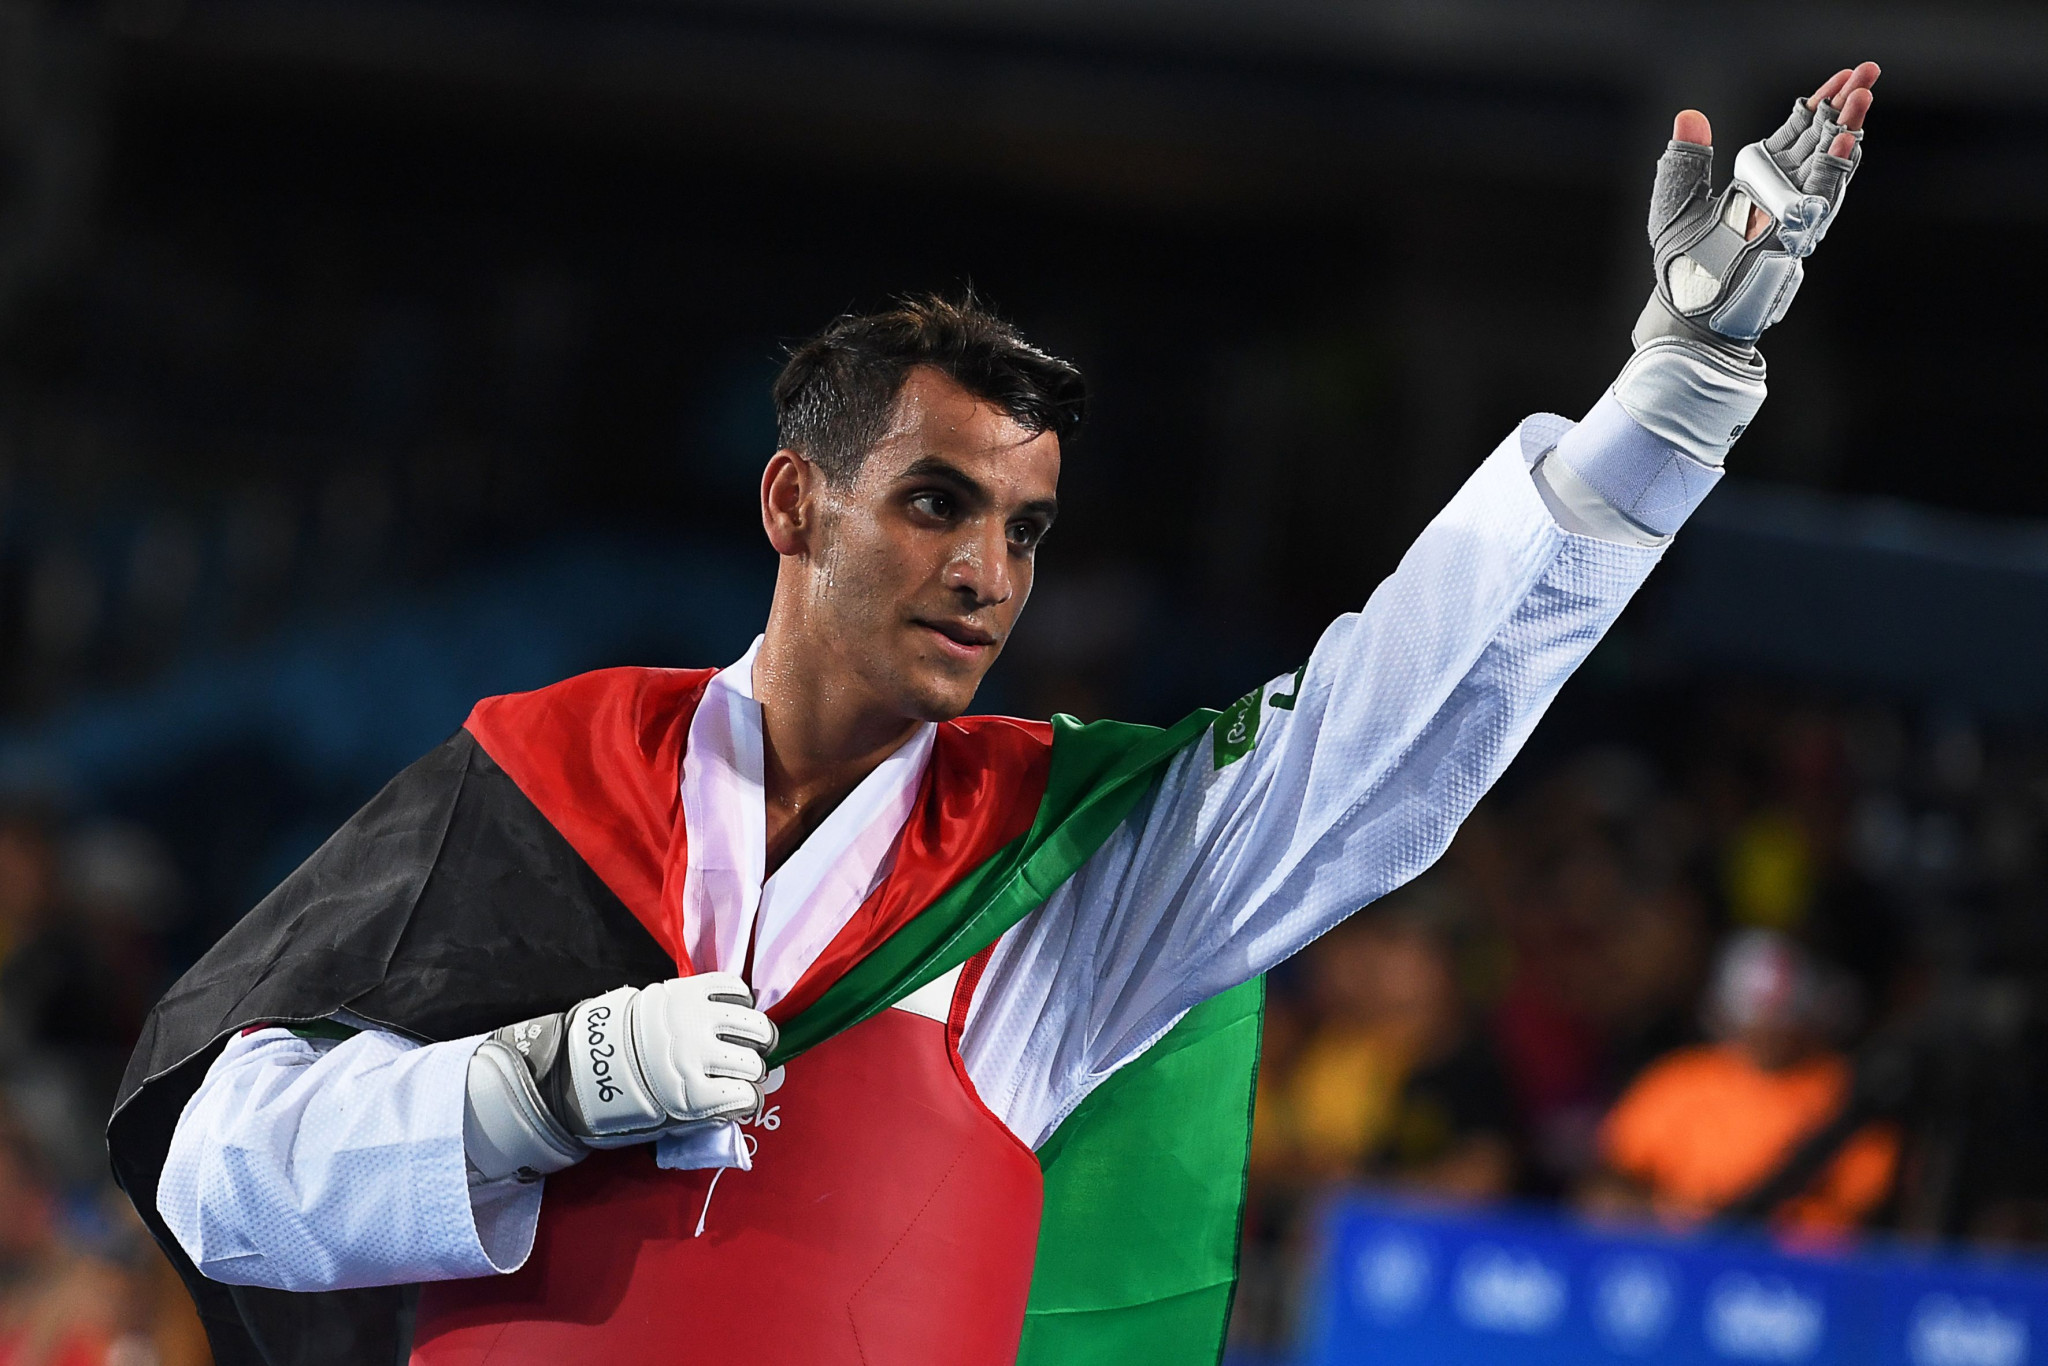 Ahmad Abu Ghaush won Jordan's first-ever Olympic medal when he struck gold at Rio 2016  ©Getty Images